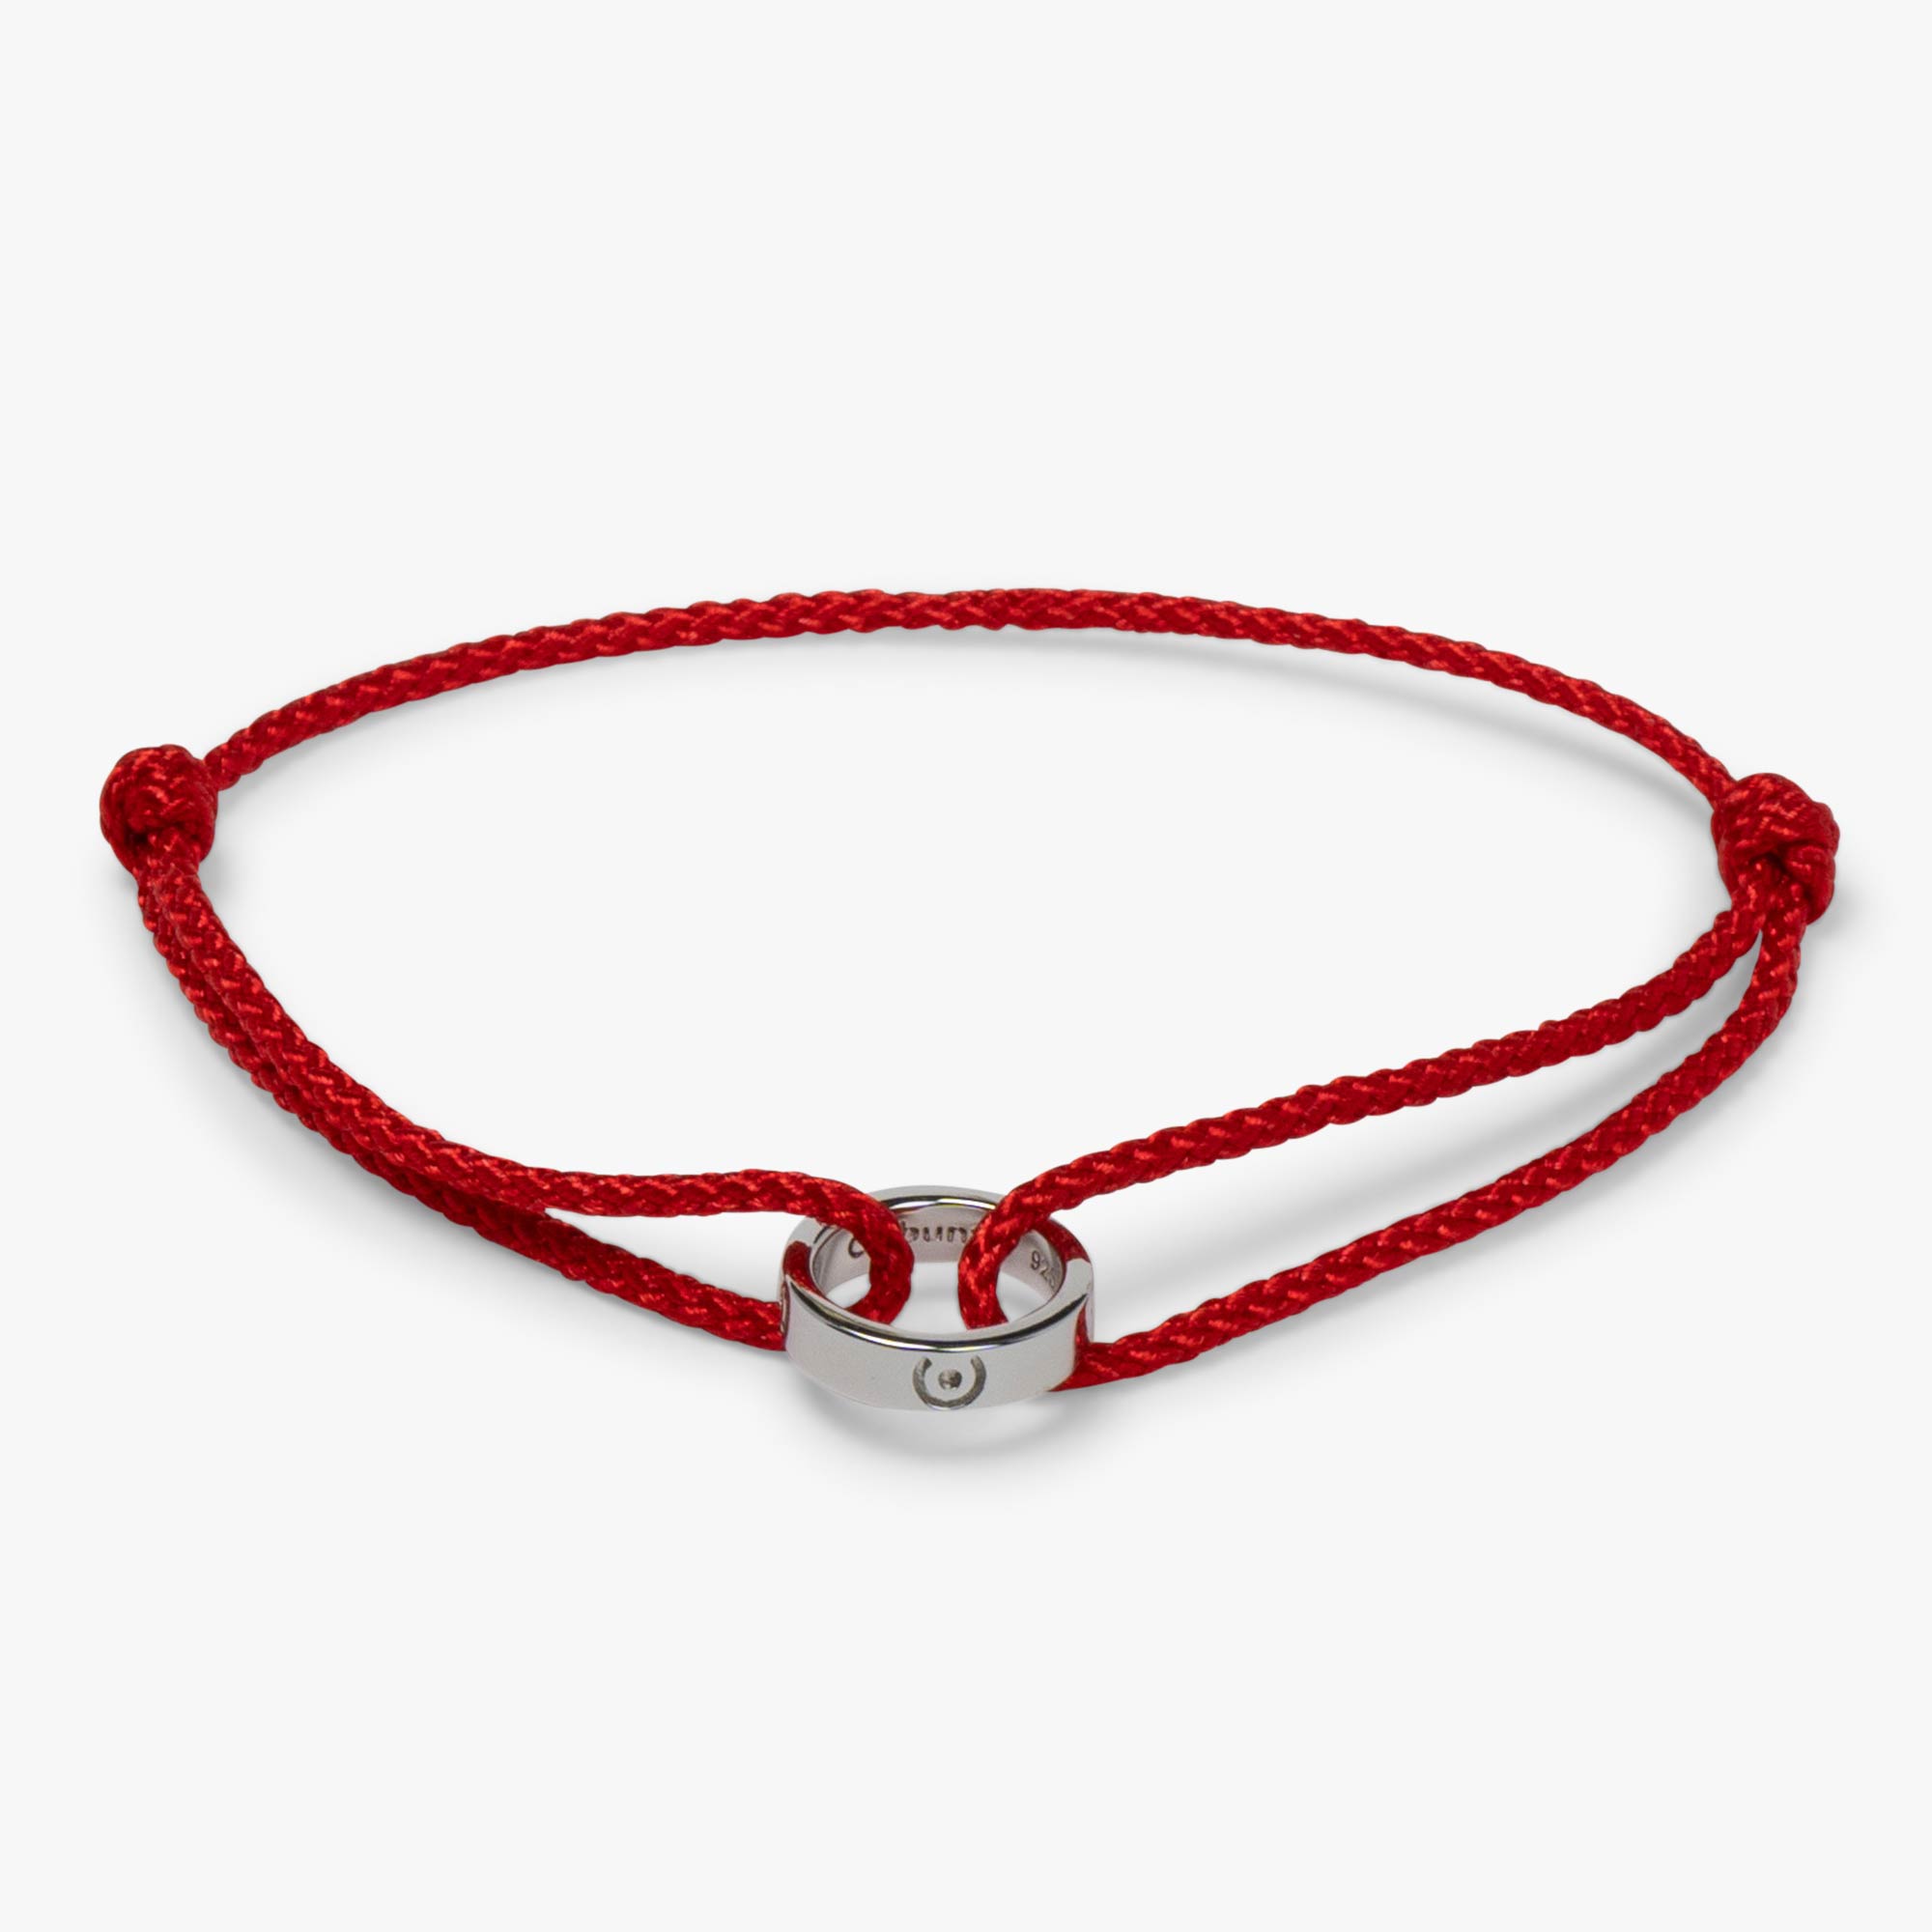 What Does Wearing a Red String Bracelet Really Mean? – Fuforme